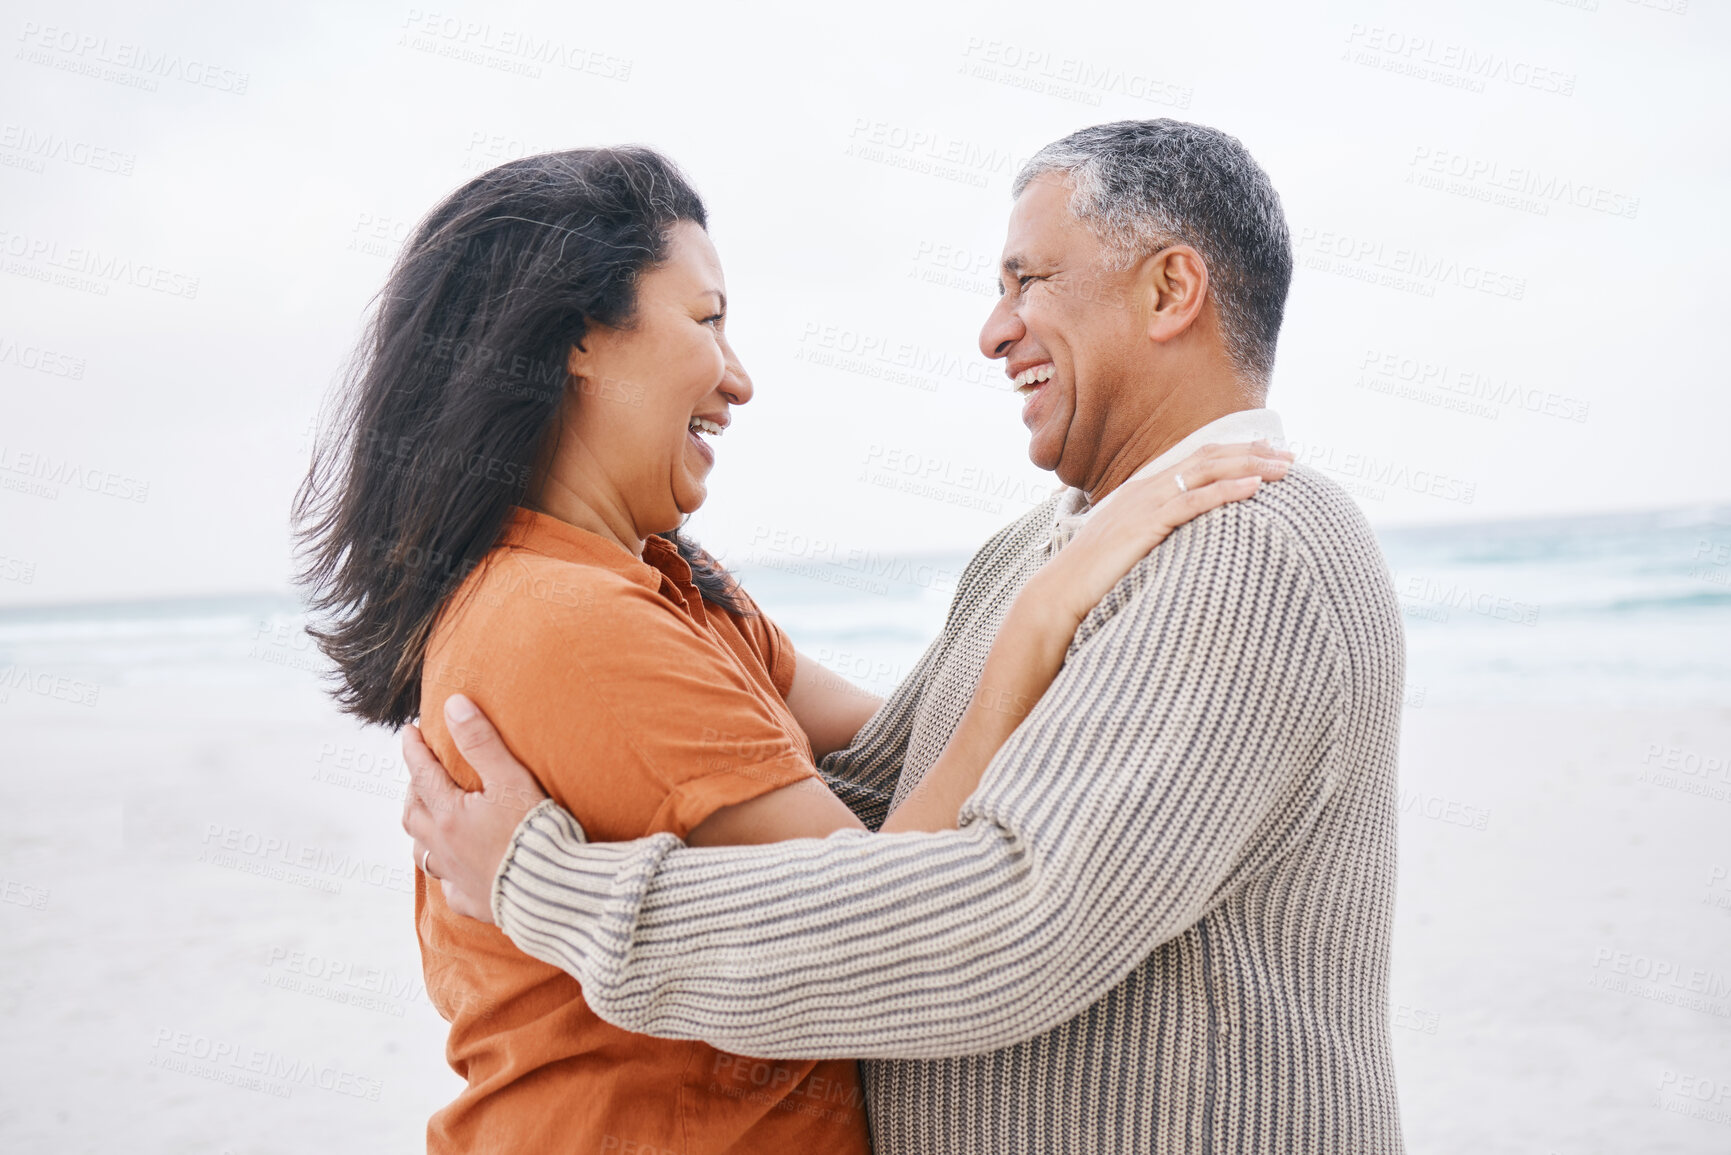 Buy stock photo Hug, beach and elderly couple laugh at funny conversation, retirement joke or anniversary humour in Mexico. Tropical winter date, comedy and romantic man, mature woman or people bond, embrace or care